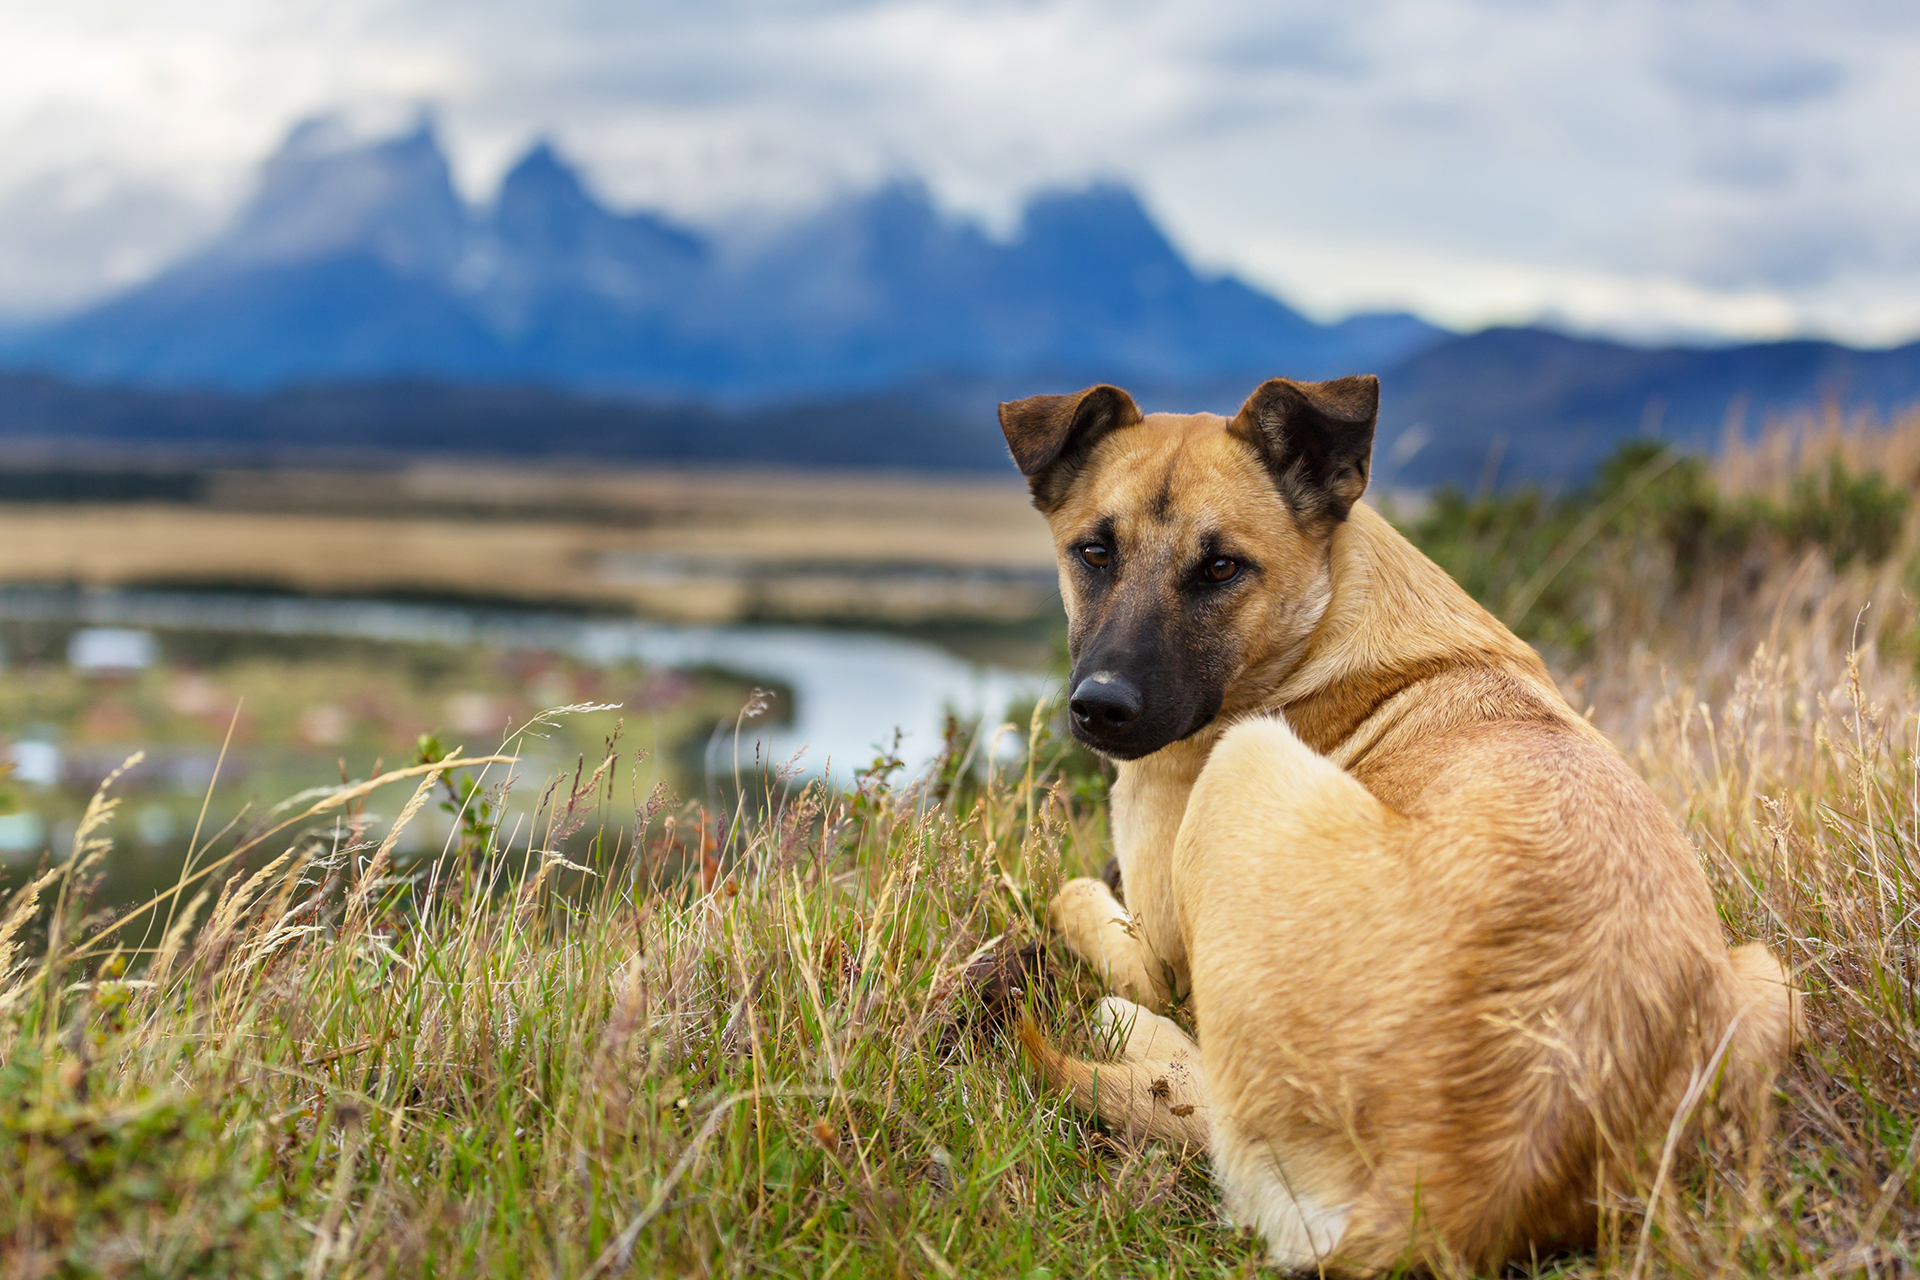 CBD Oil for Dogs – 5 Ways to Ensure a Quality Product